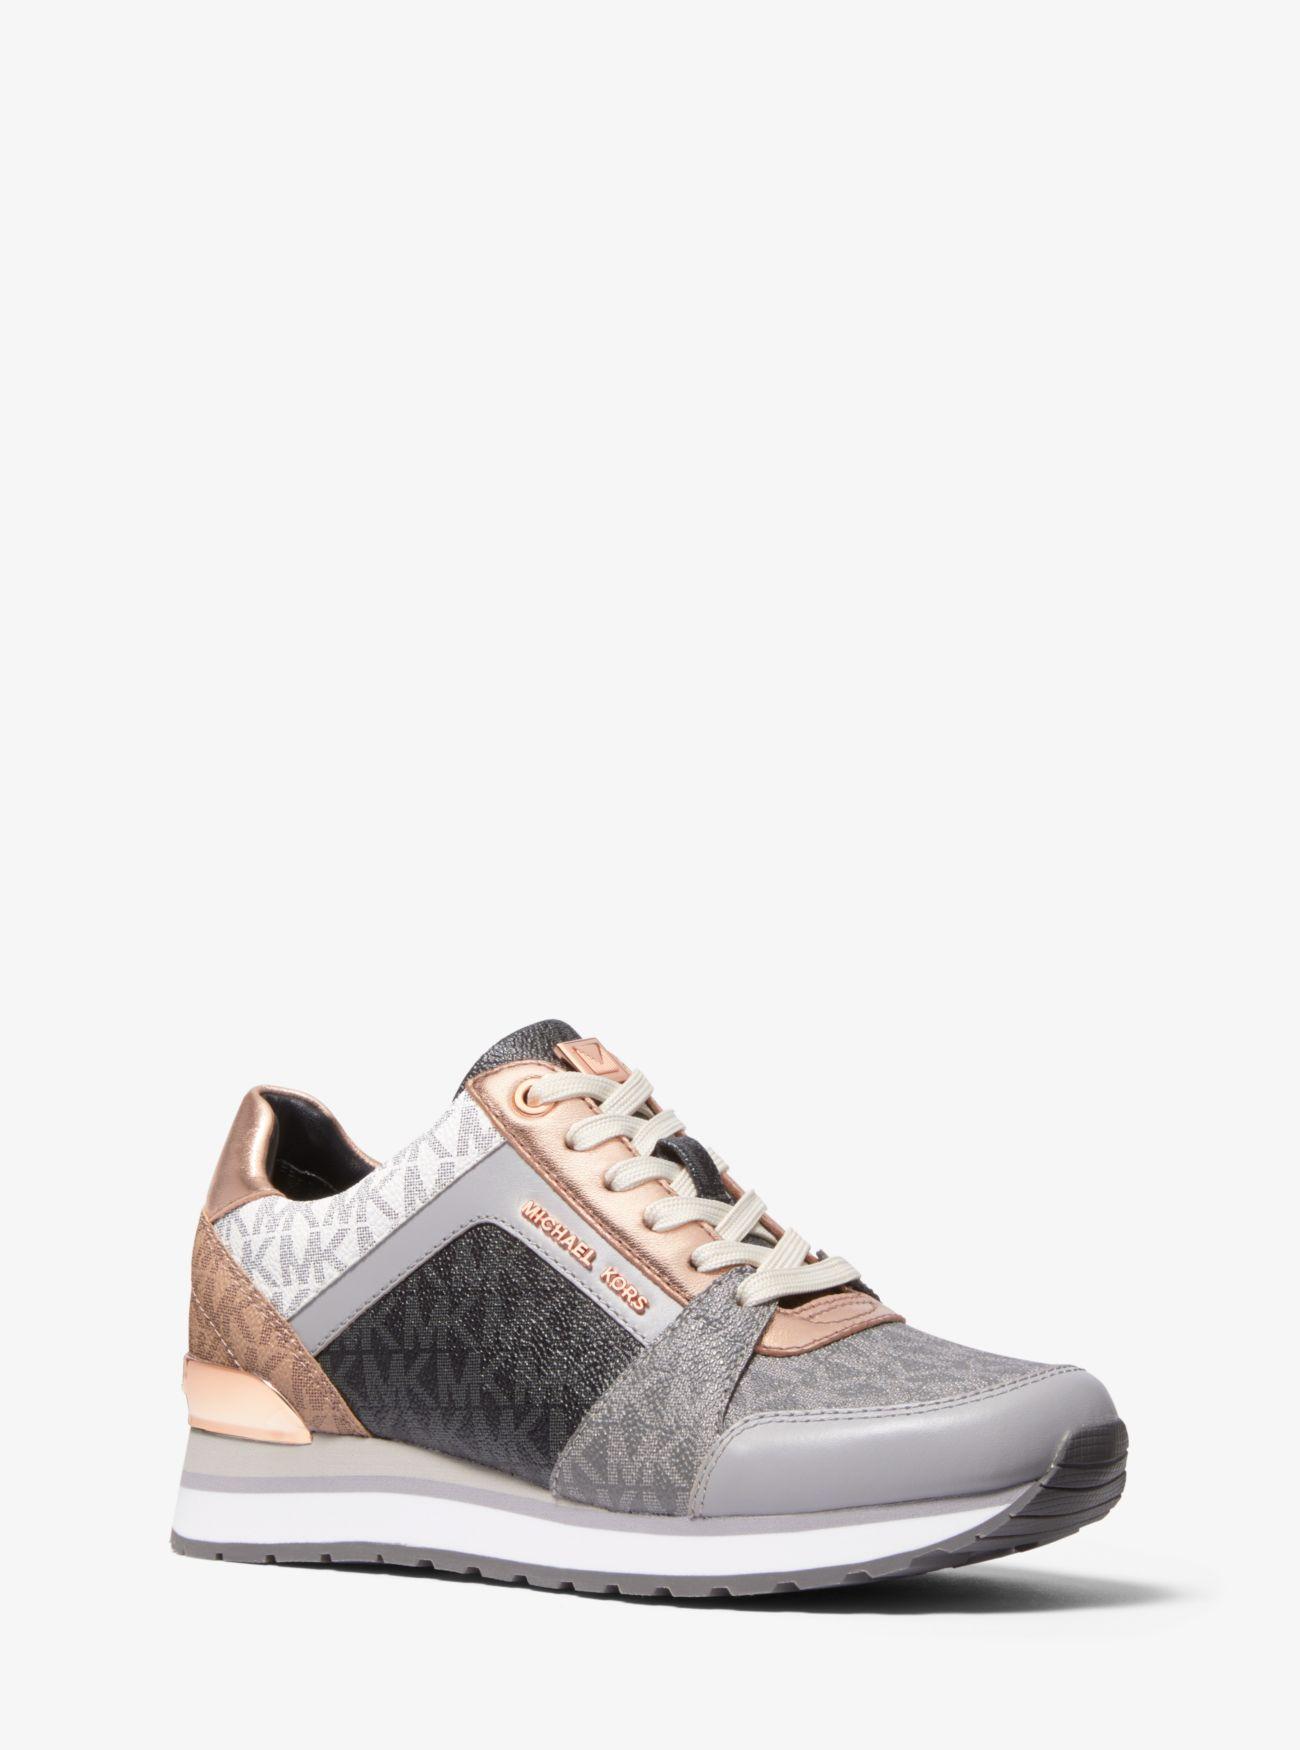 Michael Kors Leather Billie Color-block Logo Trainer in Grey (Gray) | Lyst